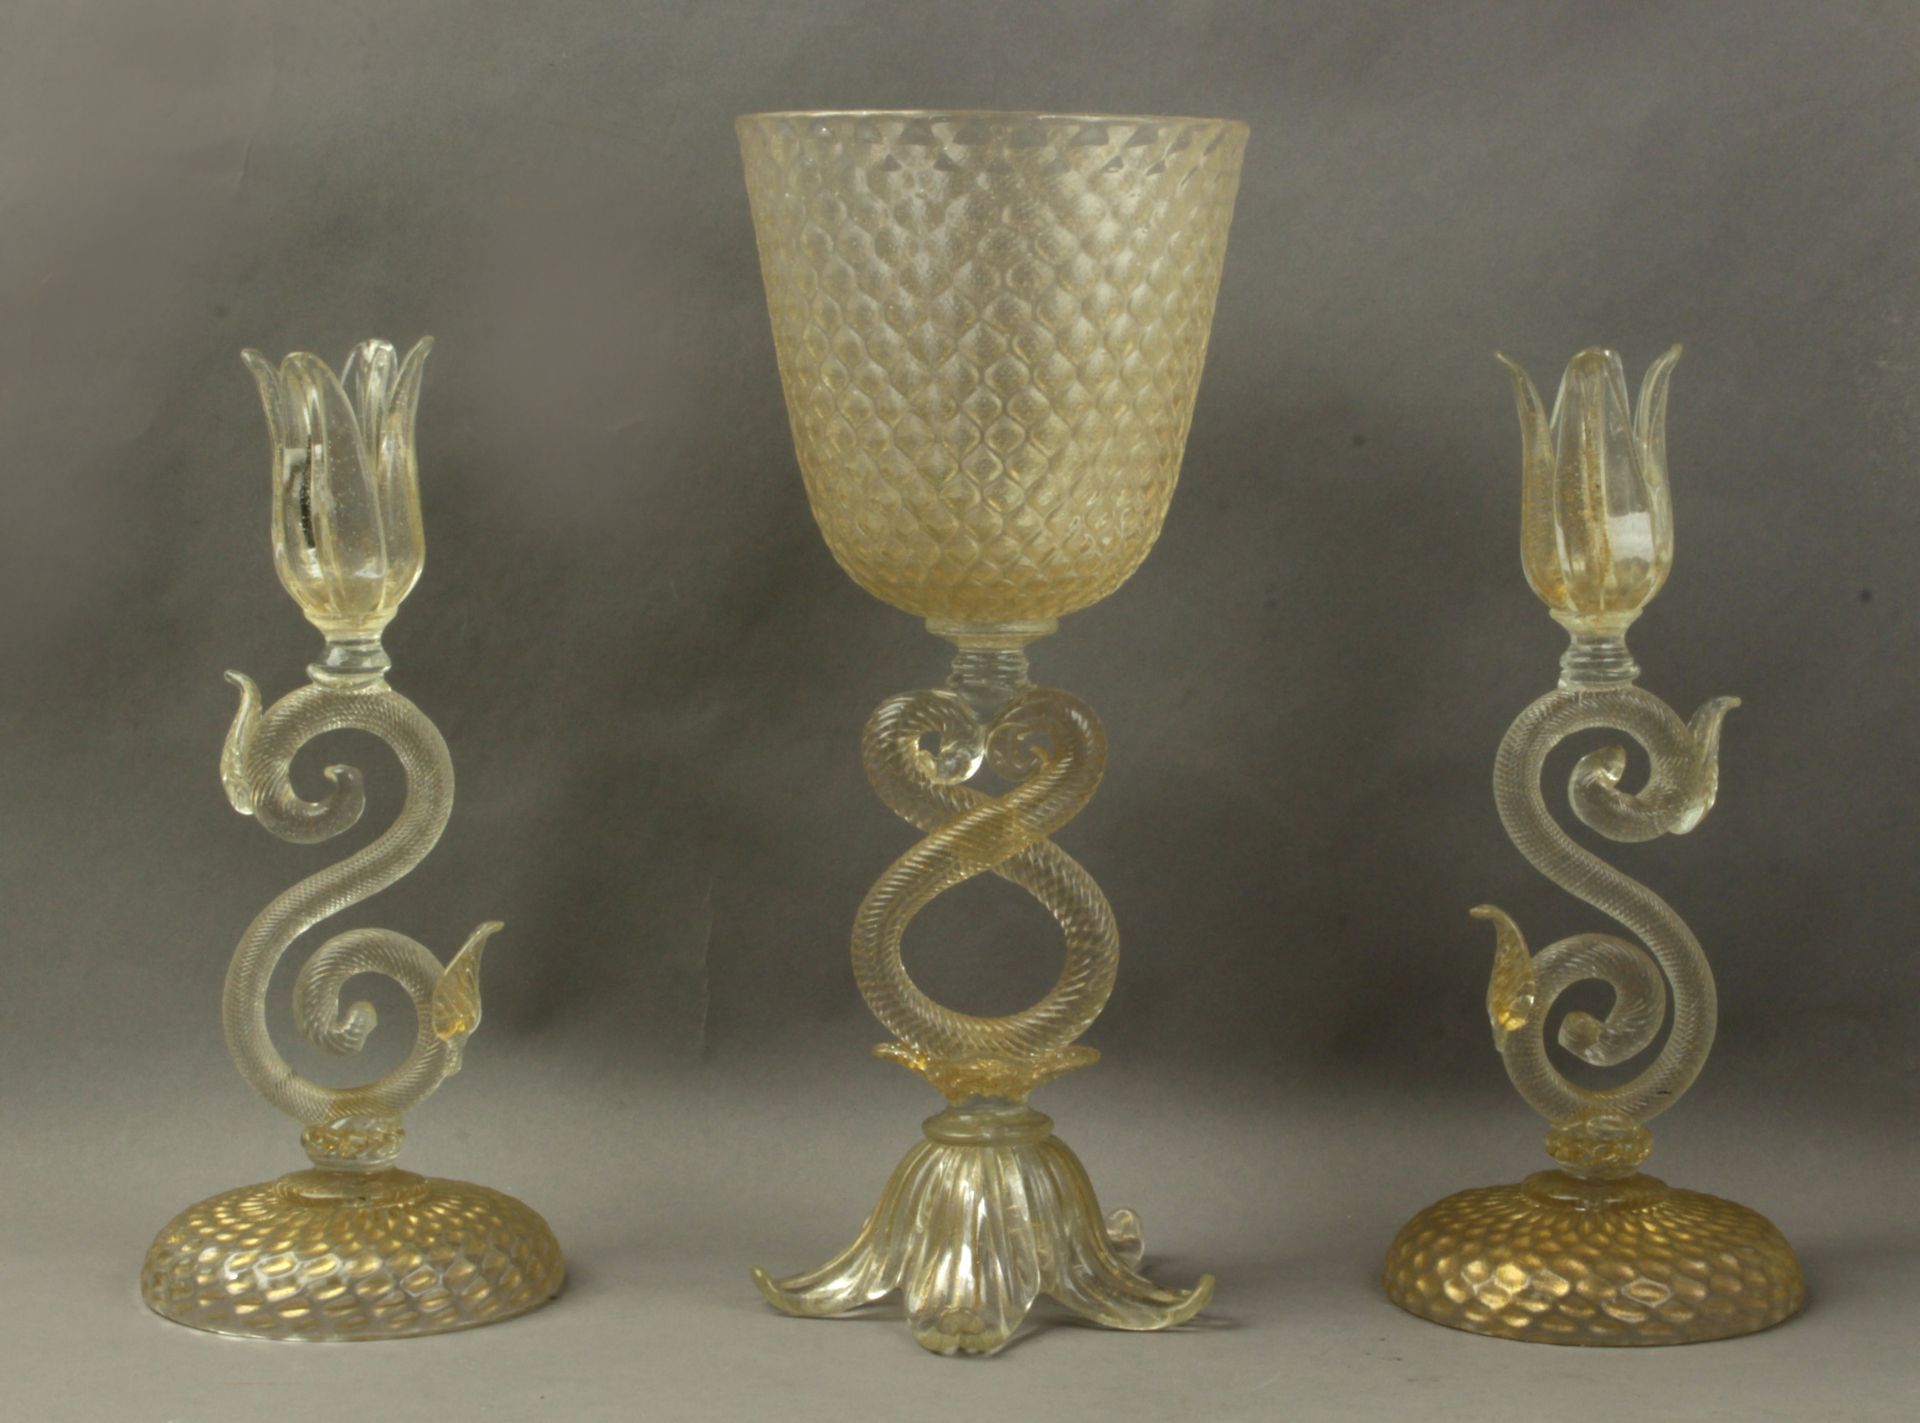 A pair of 20th century Italian candlesticks and a centrepiece in Murano glass